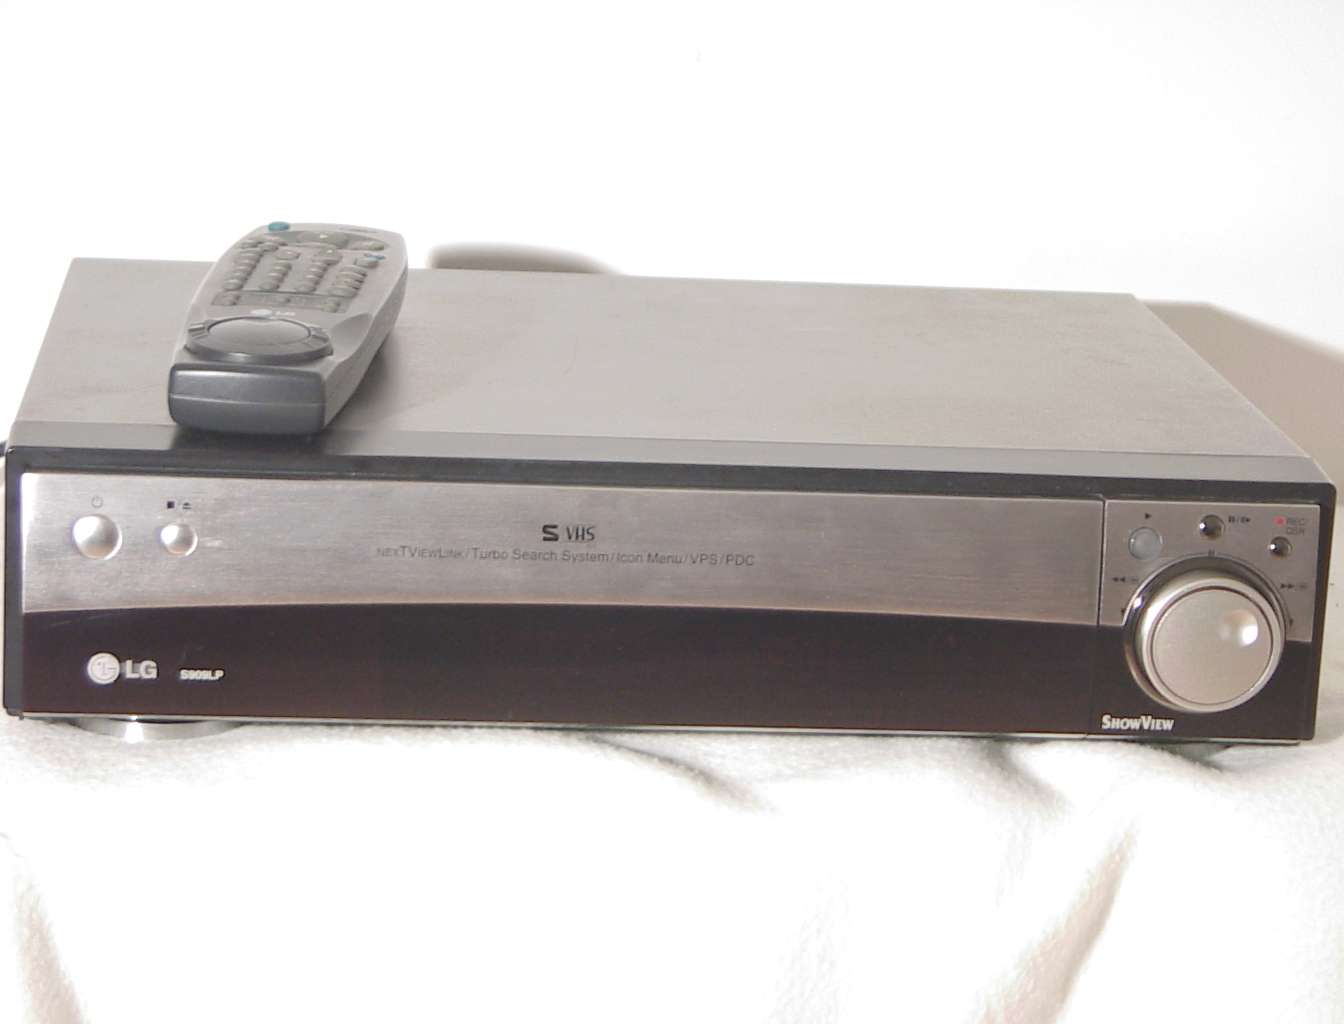 LG S909 LP Where can I find the schematic of this video recorder free